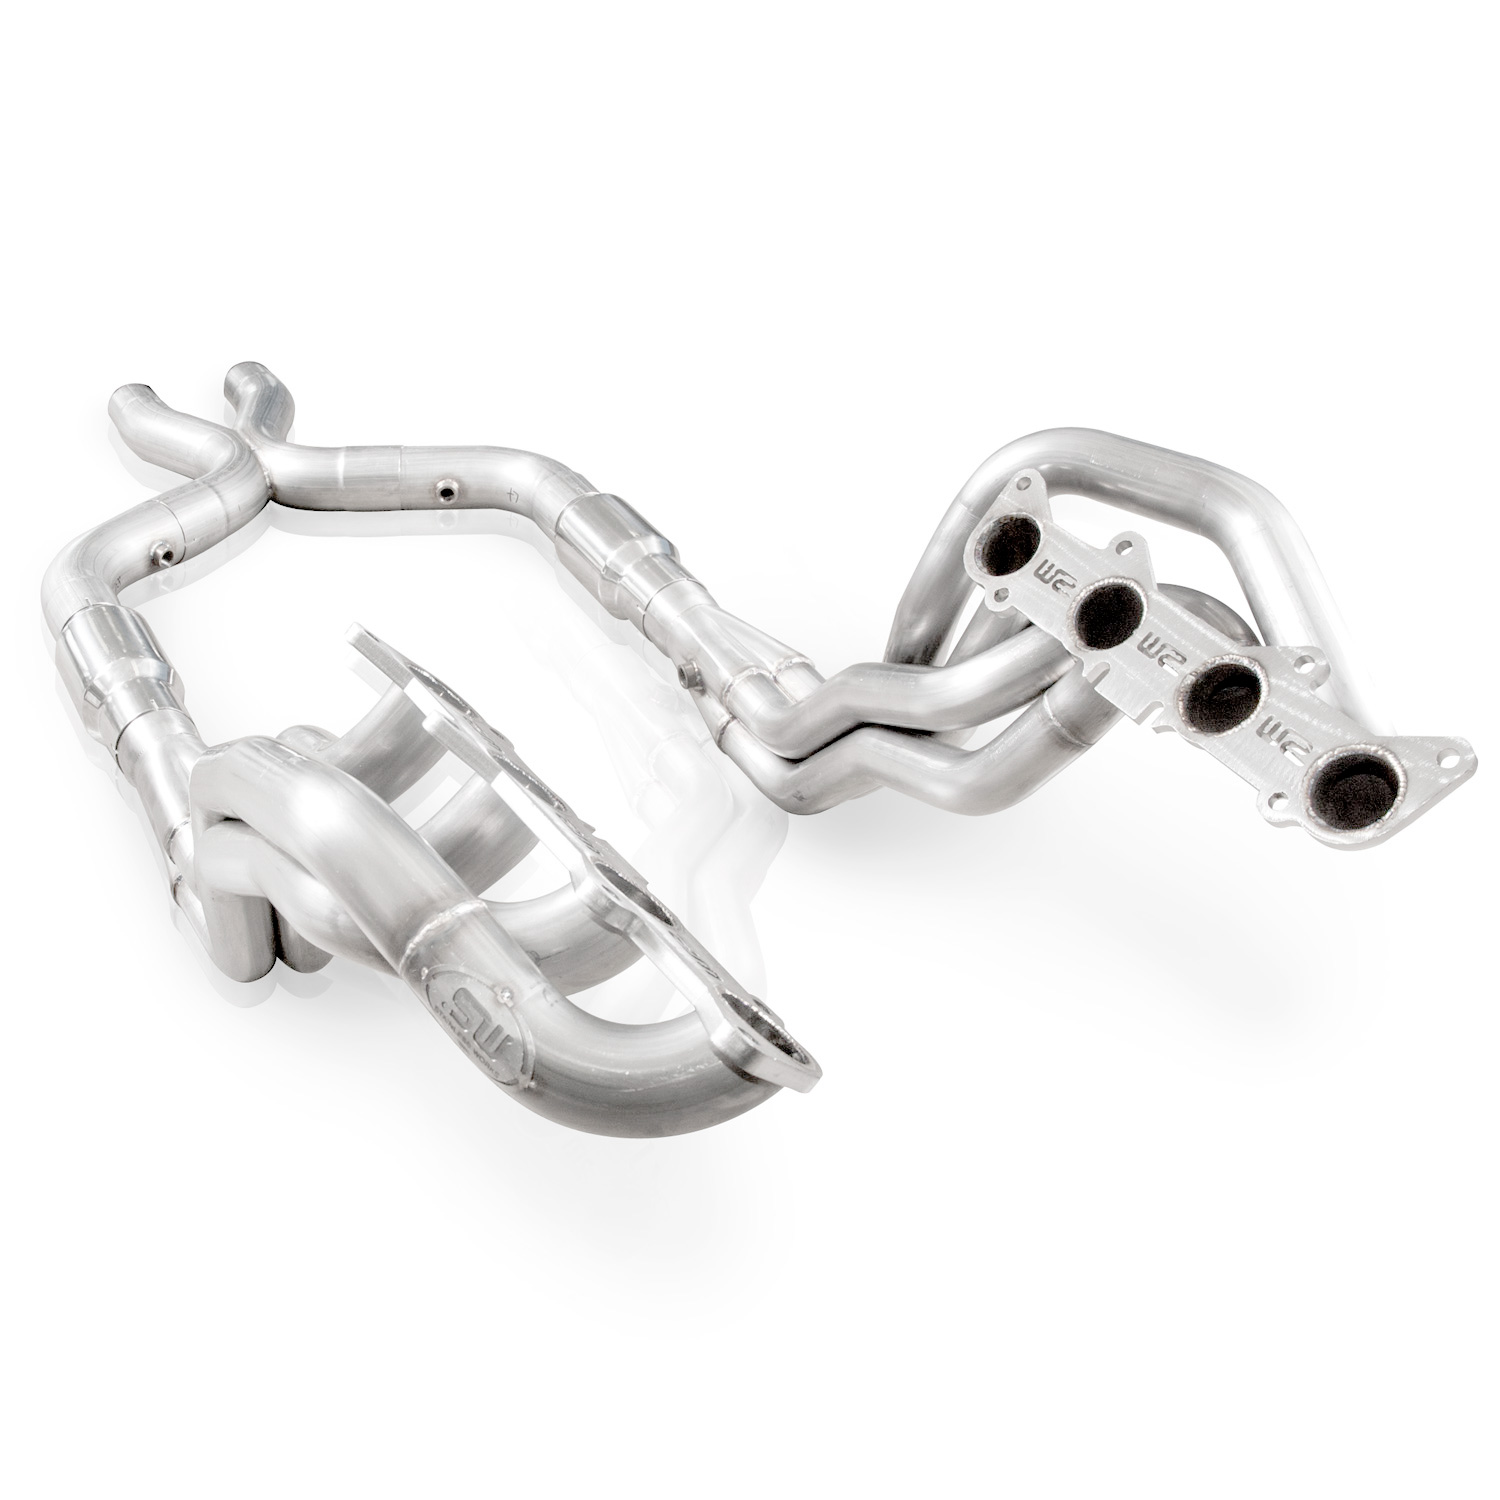 2011-2014 Mustang GT 5.0L SW Headers 1-7/8" With Catted Leads Factory Connect